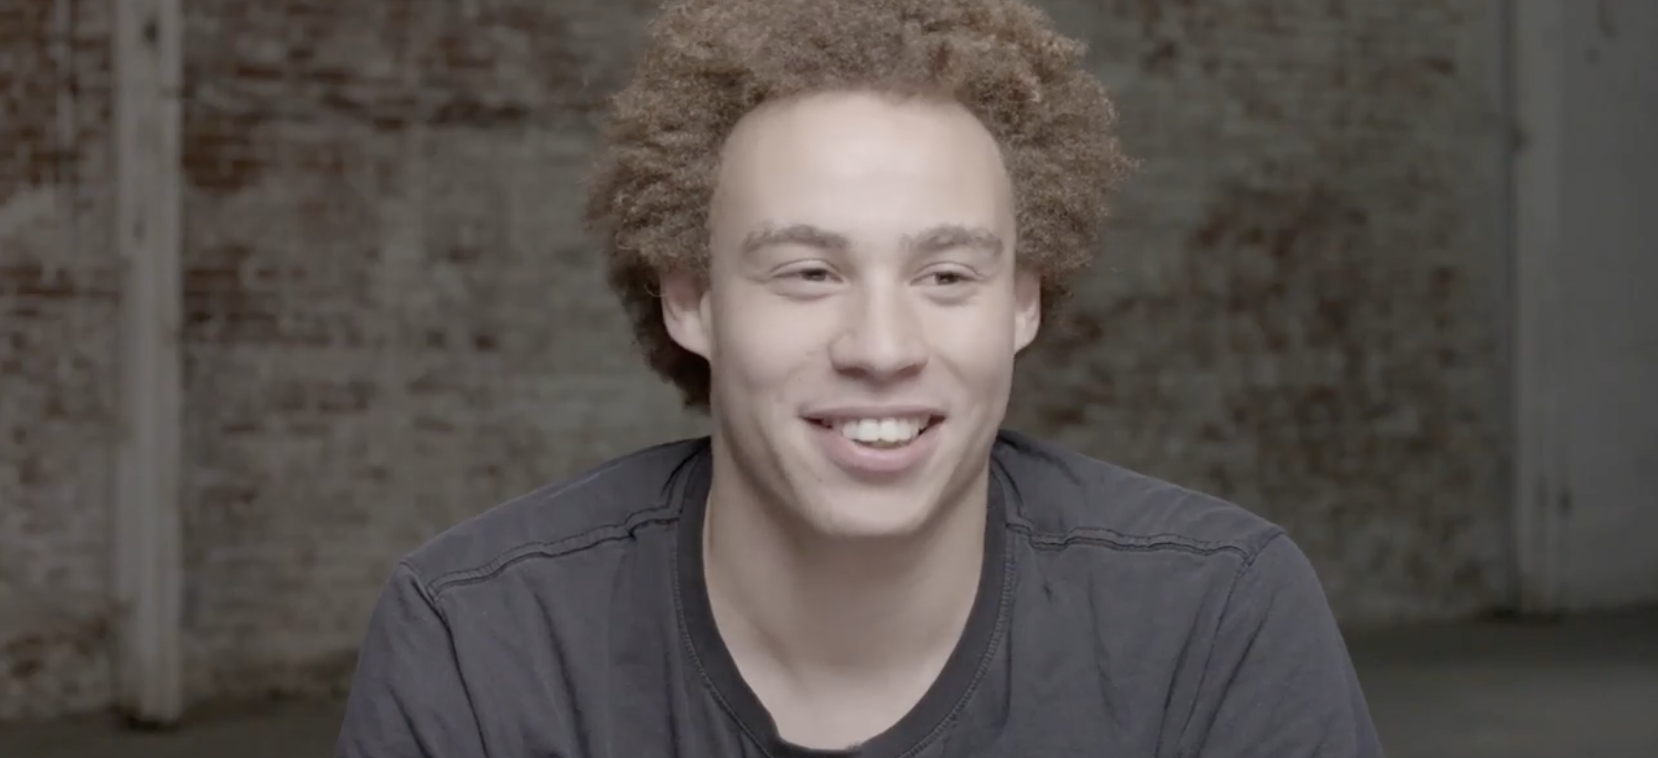 Meet Marcus Hutchins: the Black Hacker Who Saved the Internet and Got Arrested by the FBI